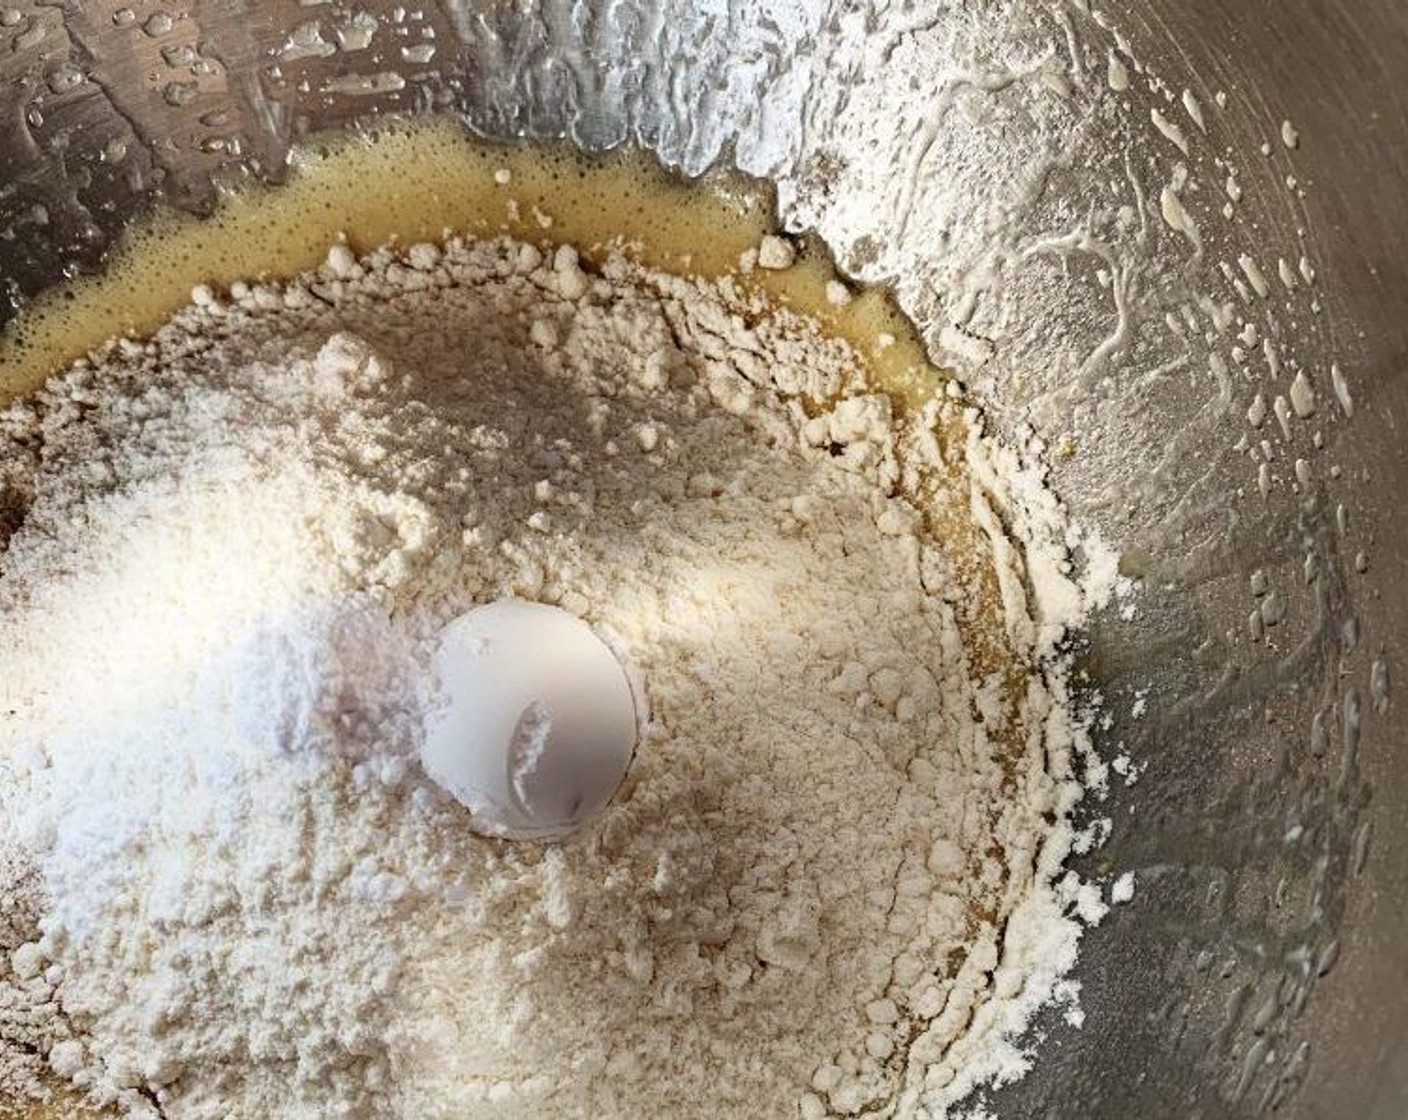 step 3 Add the Barley Flour (1 cup), Cake Flour (1 cup), Baking Powder (1 tsp), and Vanilla Extract (1/4 tsp), and mix everything together using the paddle attachment of a wooden spoon